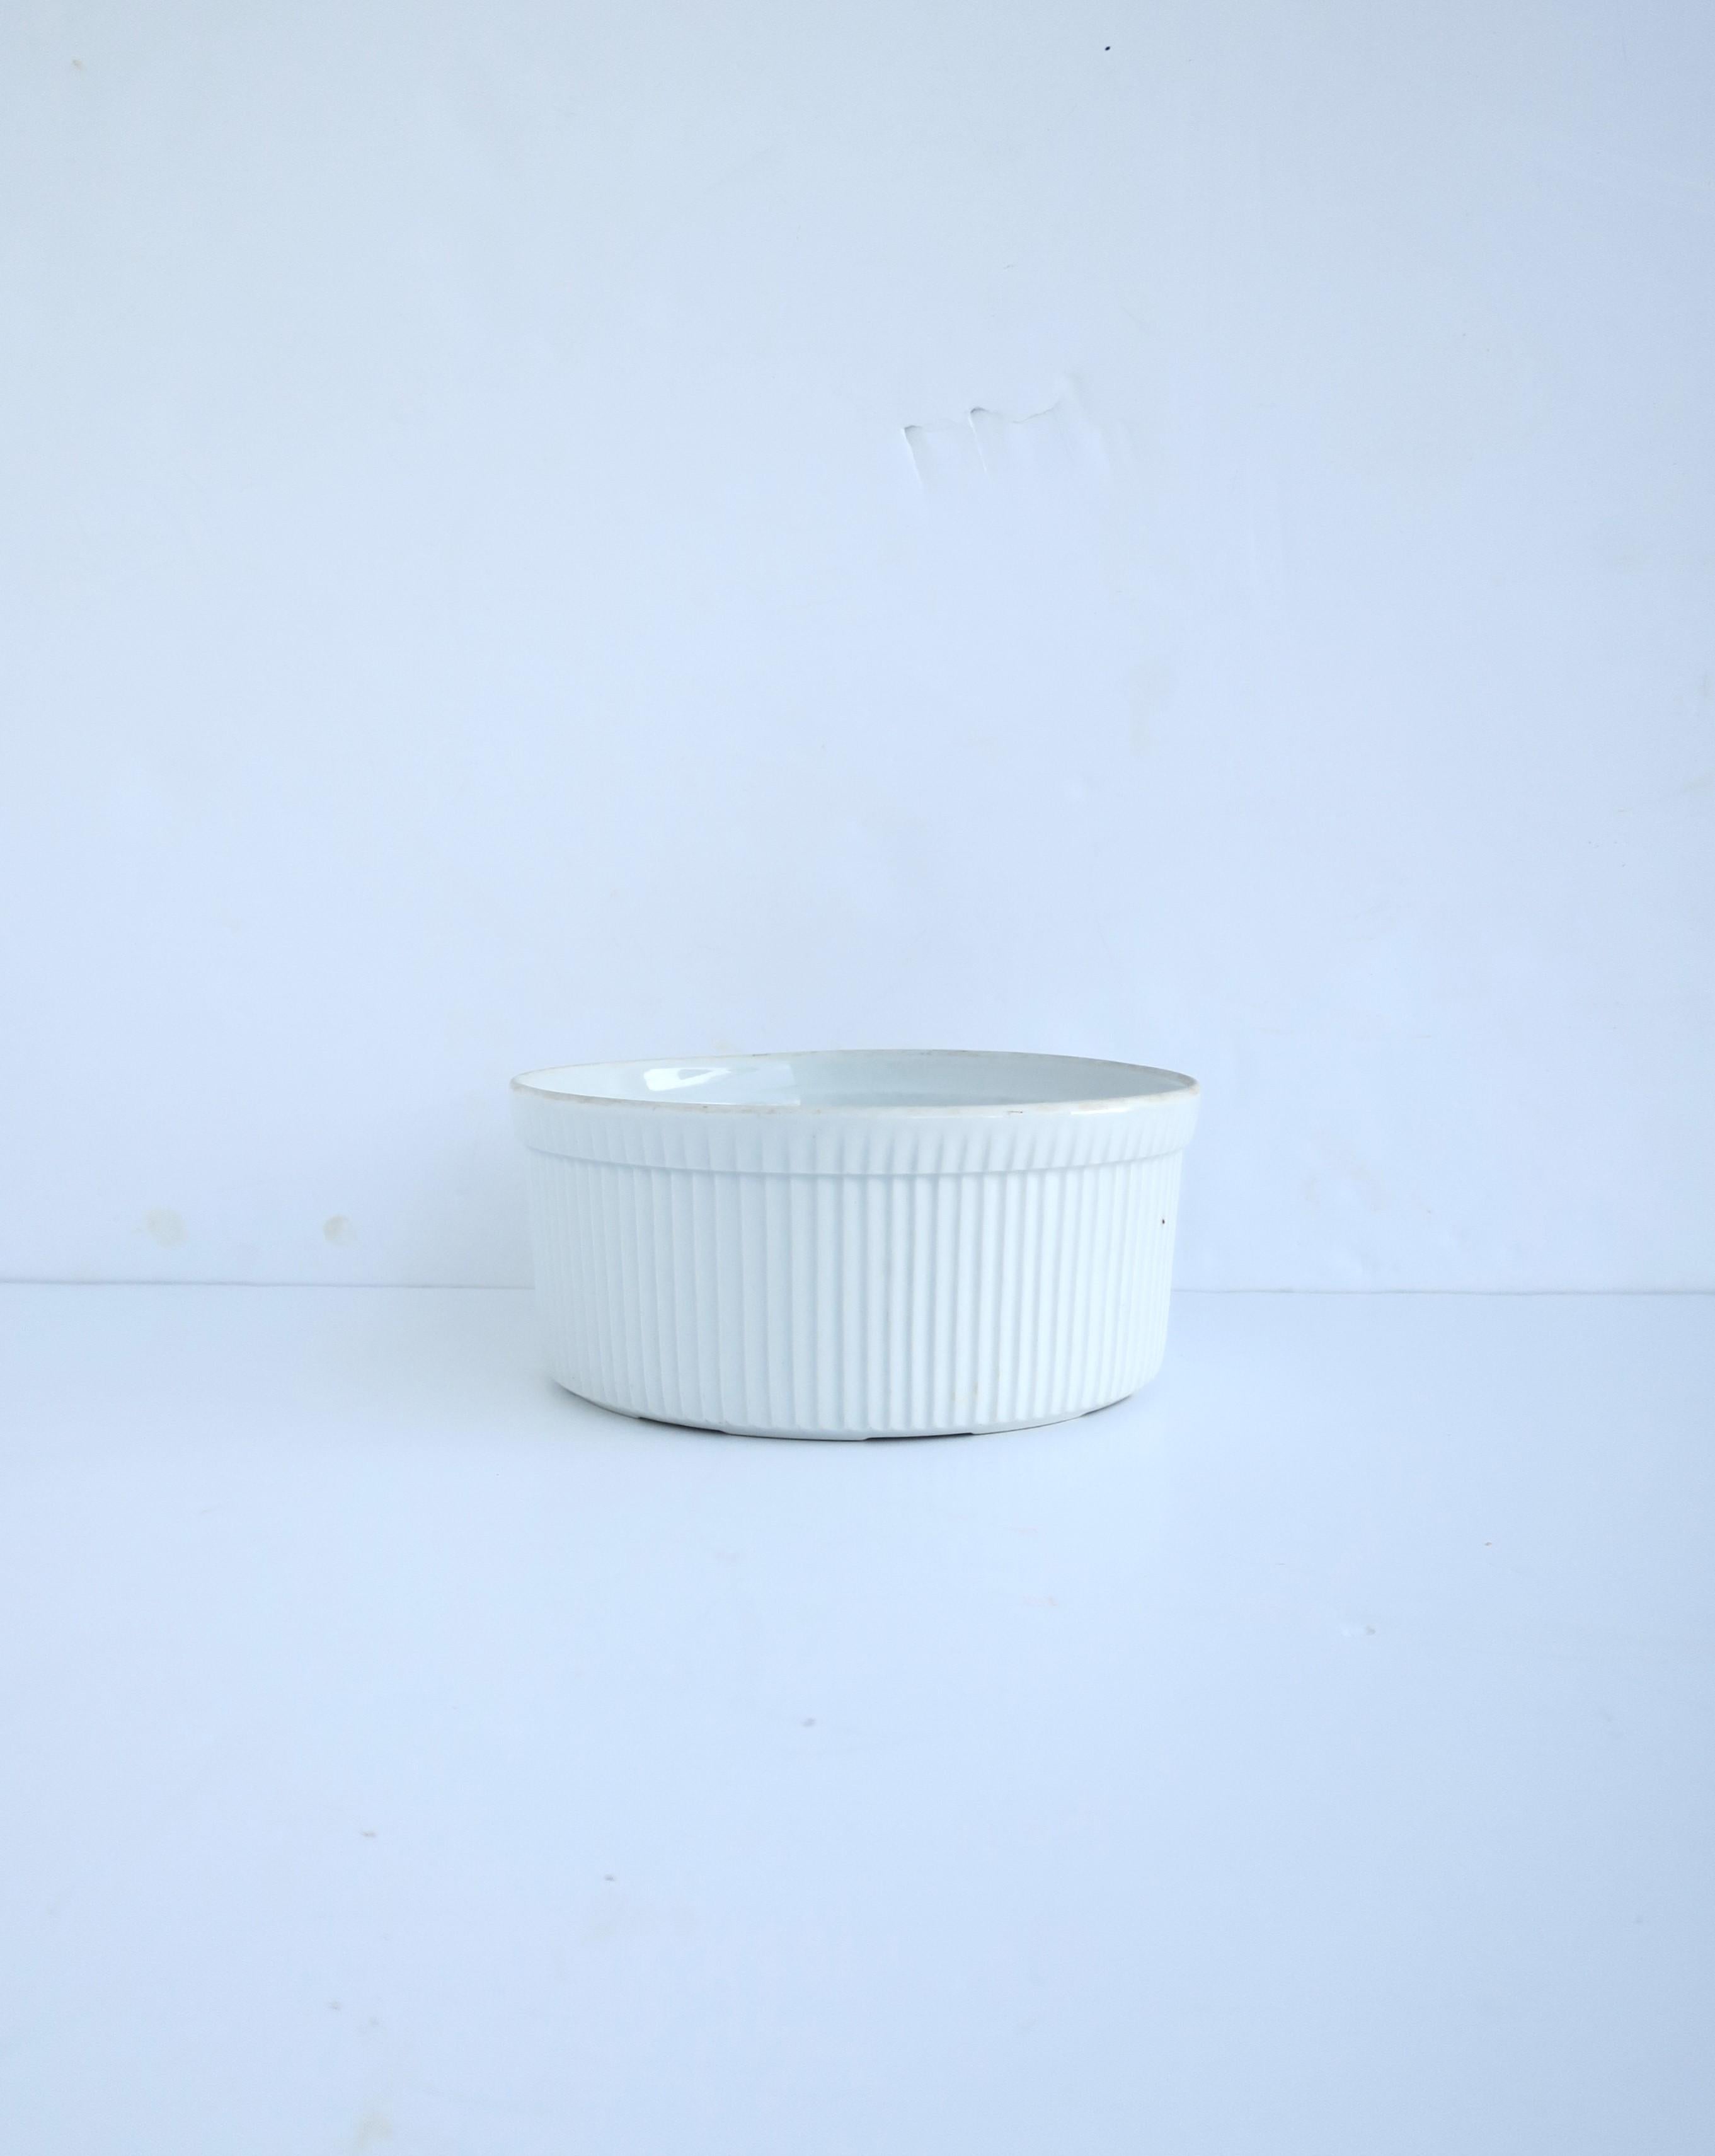 A French white porcelain bowl with fluted design, circa mid-20th century, France. A simple white porcelain souffle' or serving bowl with fluted design around exterior. Great for serving or cooking/baking. Made in France as marked on underside, shown